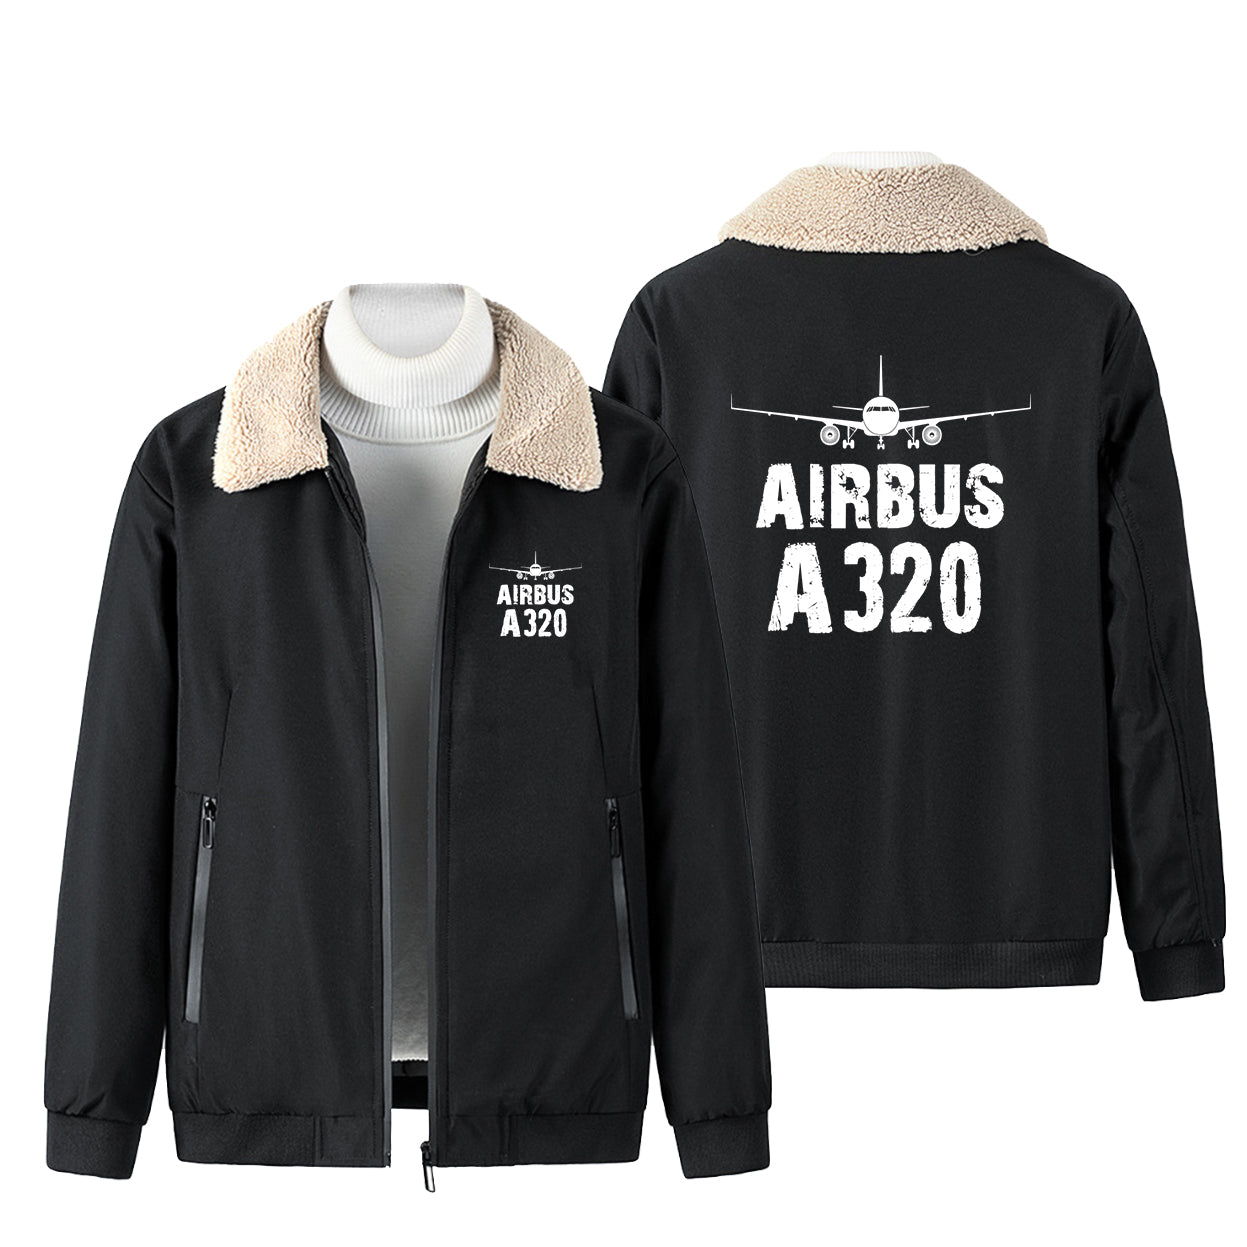 Airbus A320 & Plane Designed Winter Bomber Jackets